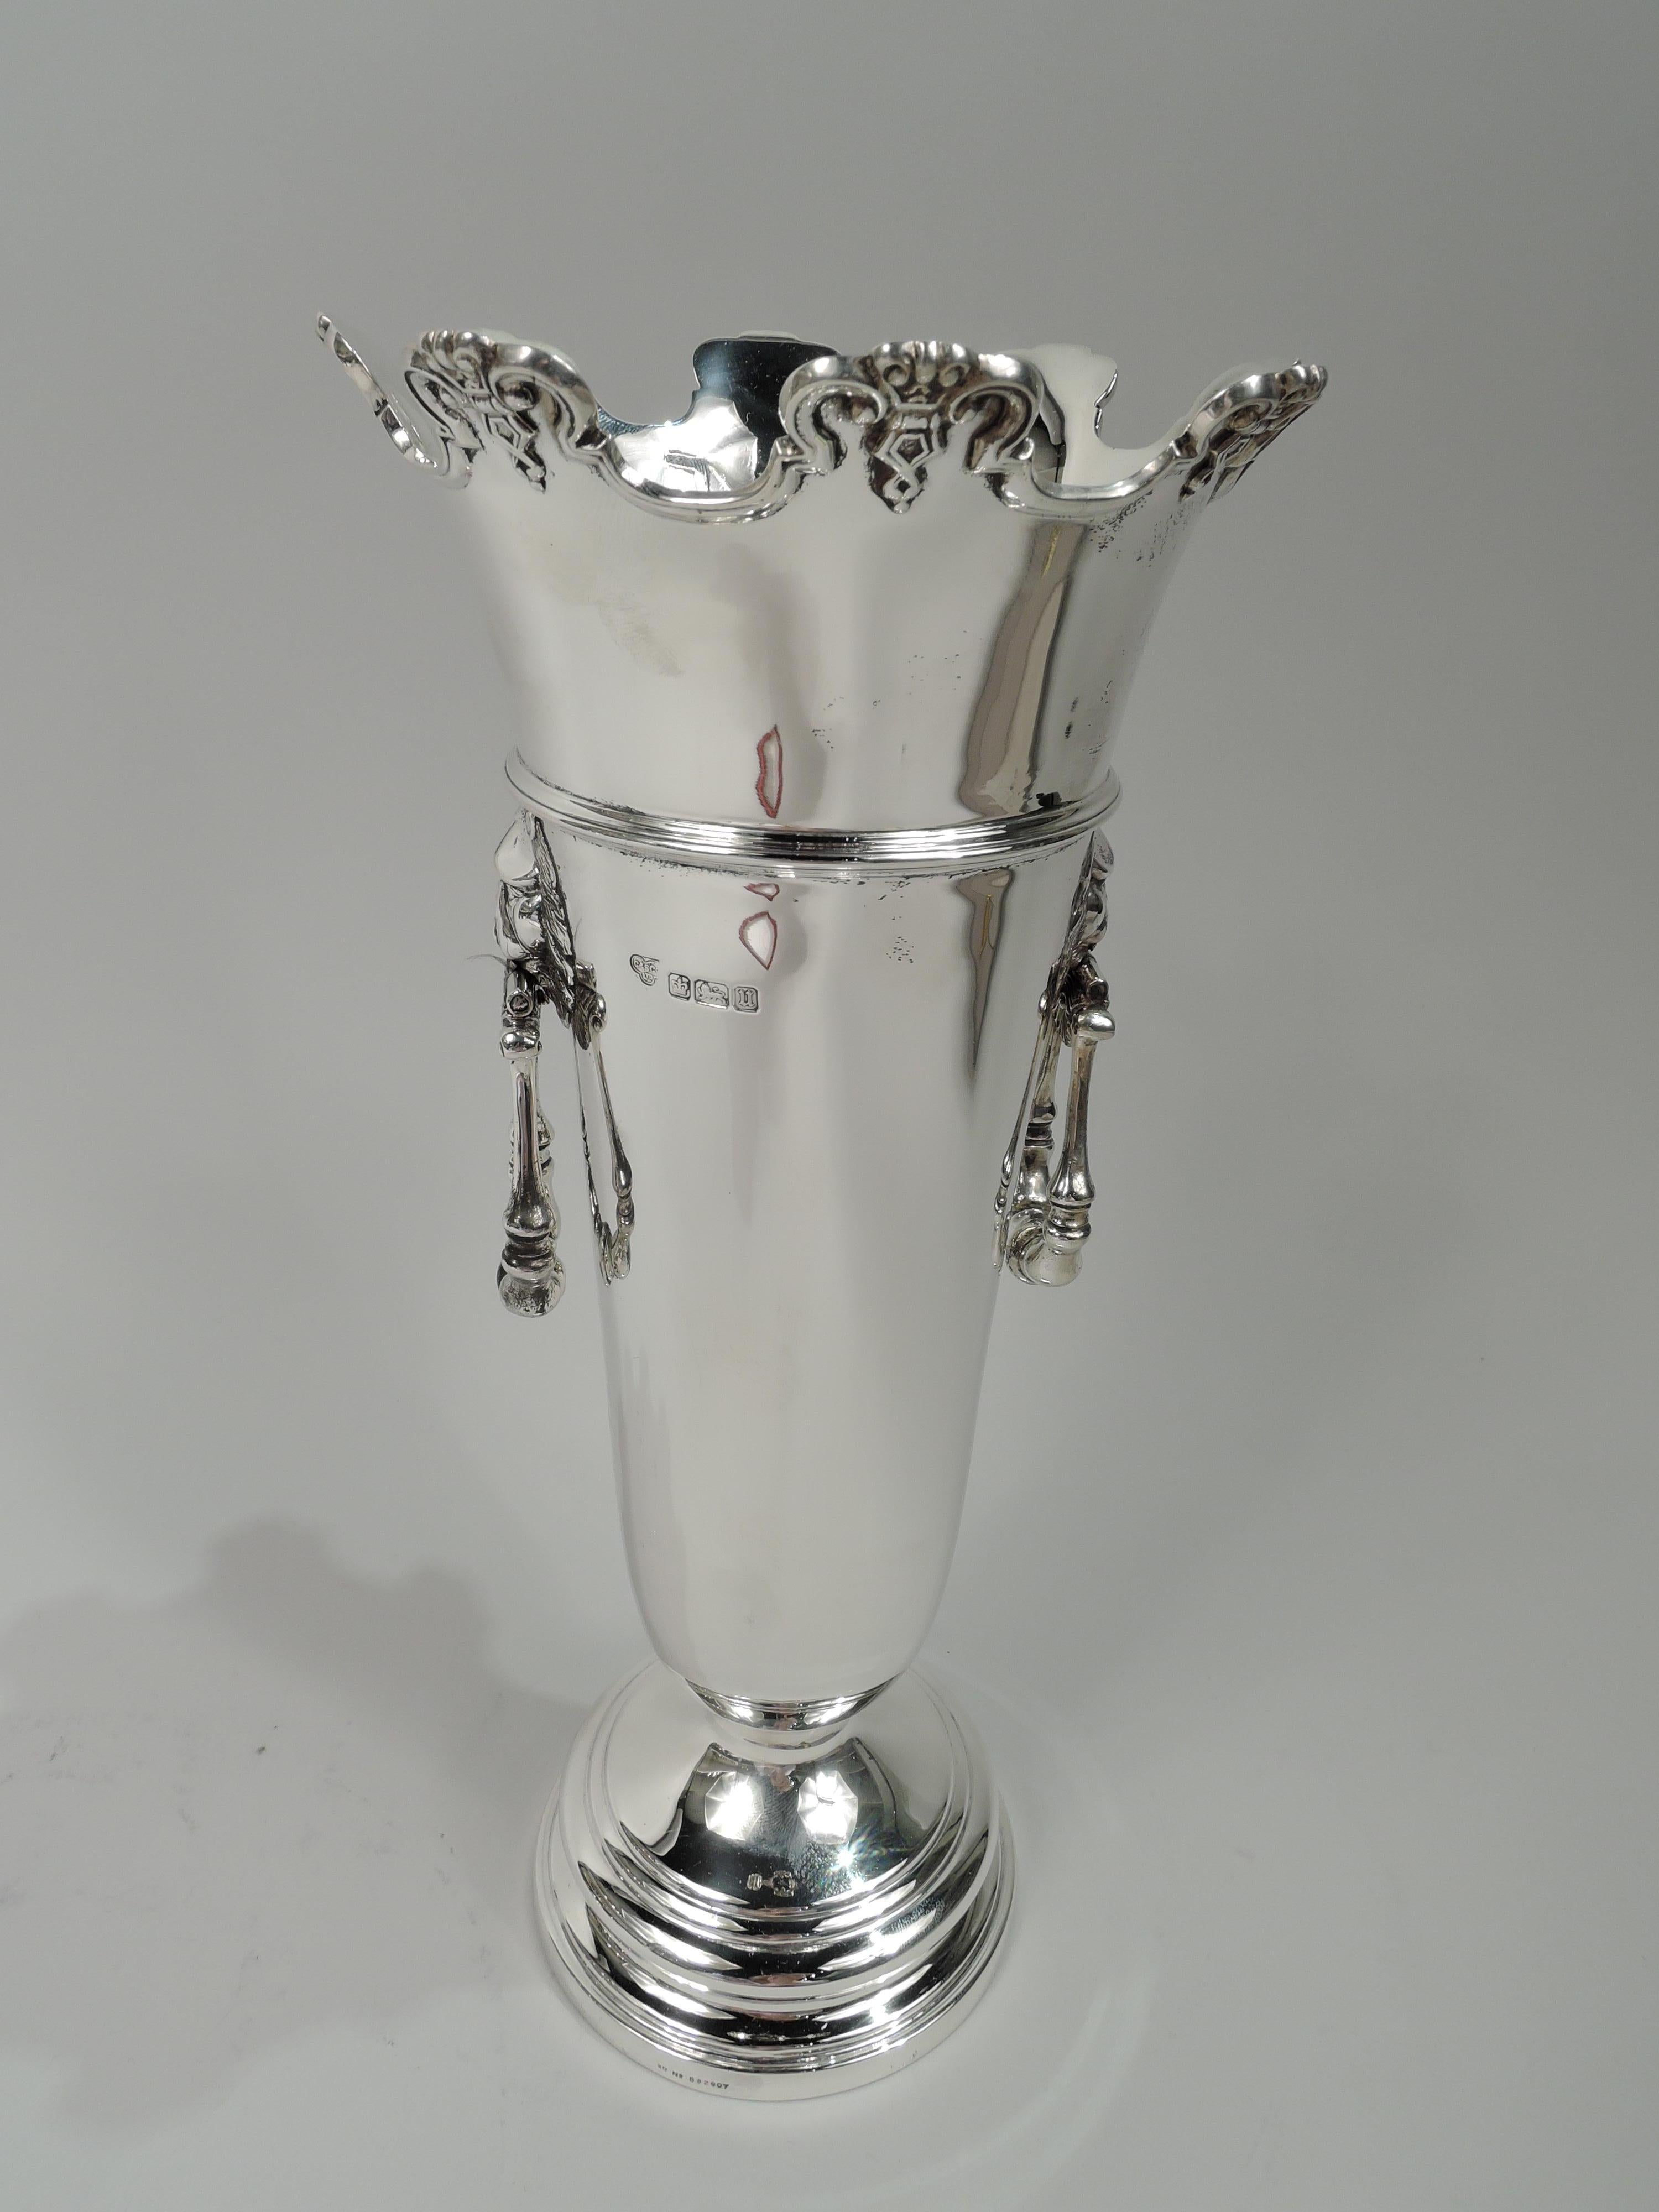 George V sterling silver vase. Made by Goldsmiths & Silversmiths Co. Ltd in Sheffield in 1912. Tapering and girdled tube on stepped foot. Flared and castellated rim with applied molding and ornament. Lion’s head side mounts with hinged and turned